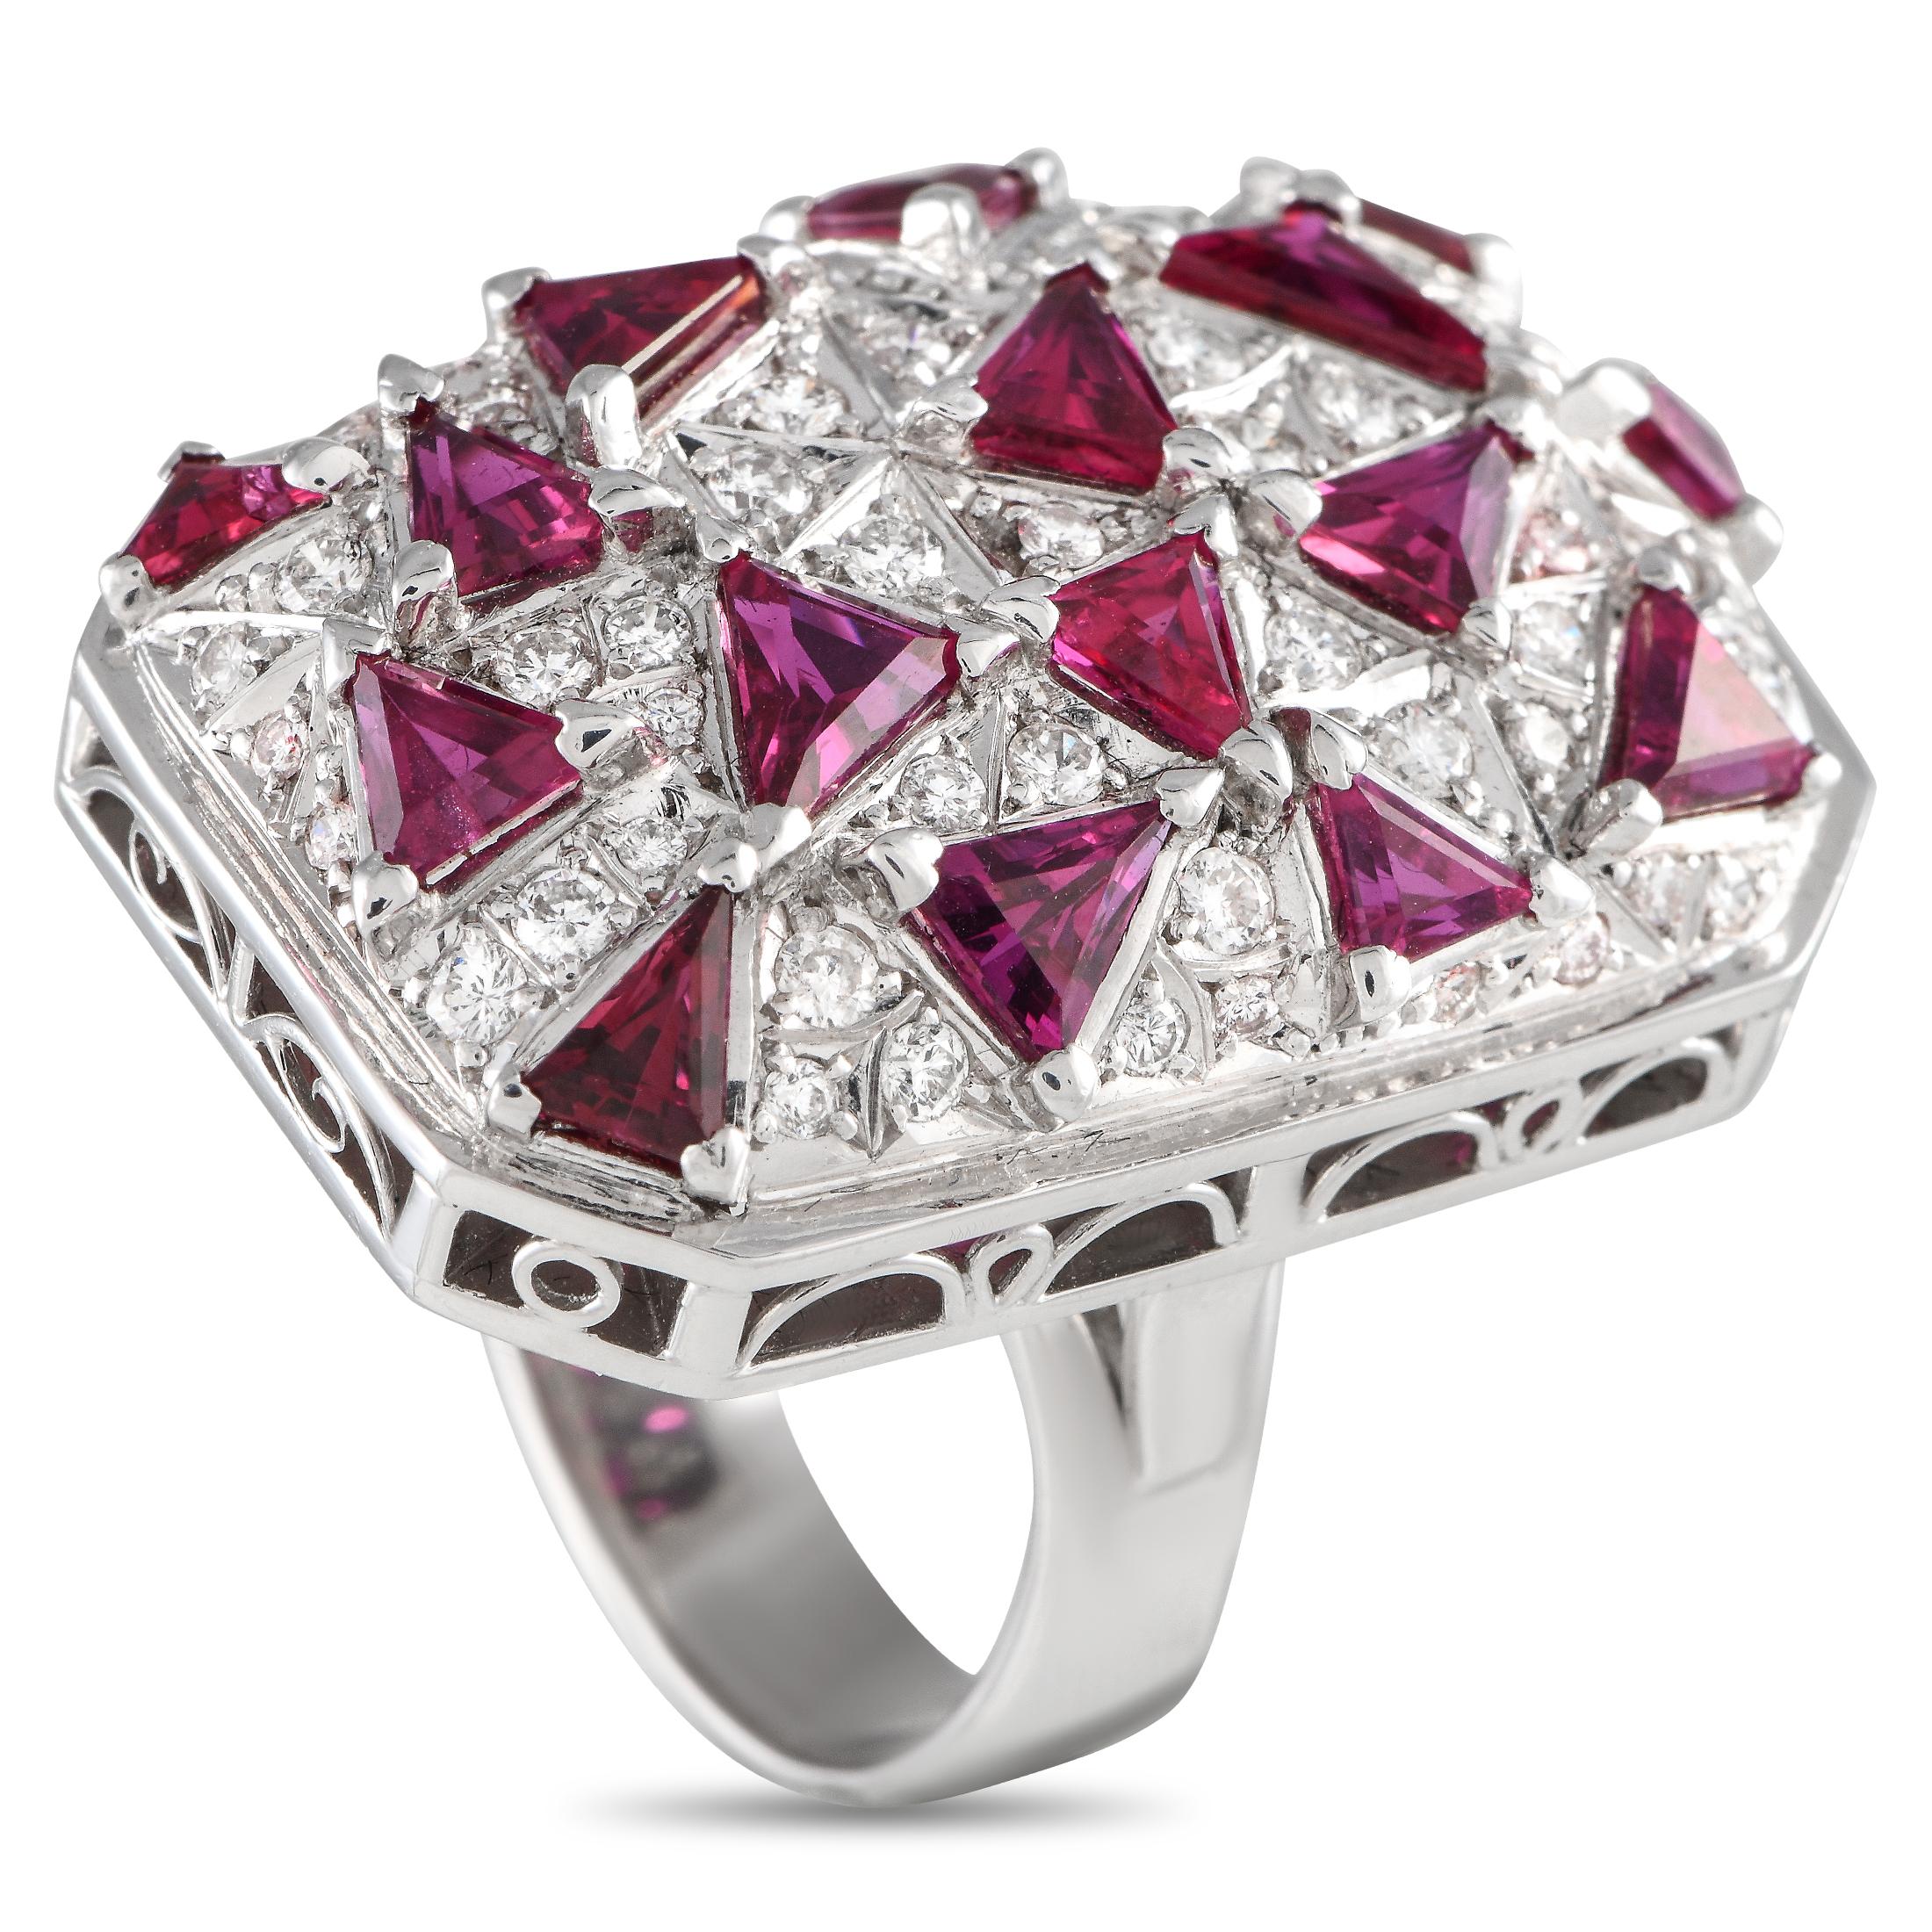 18K White Gold 0.78ct Diamond and Ruby Cocktail Ring MF08-012424 In Excellent Condition For Sale In Southampton, PA